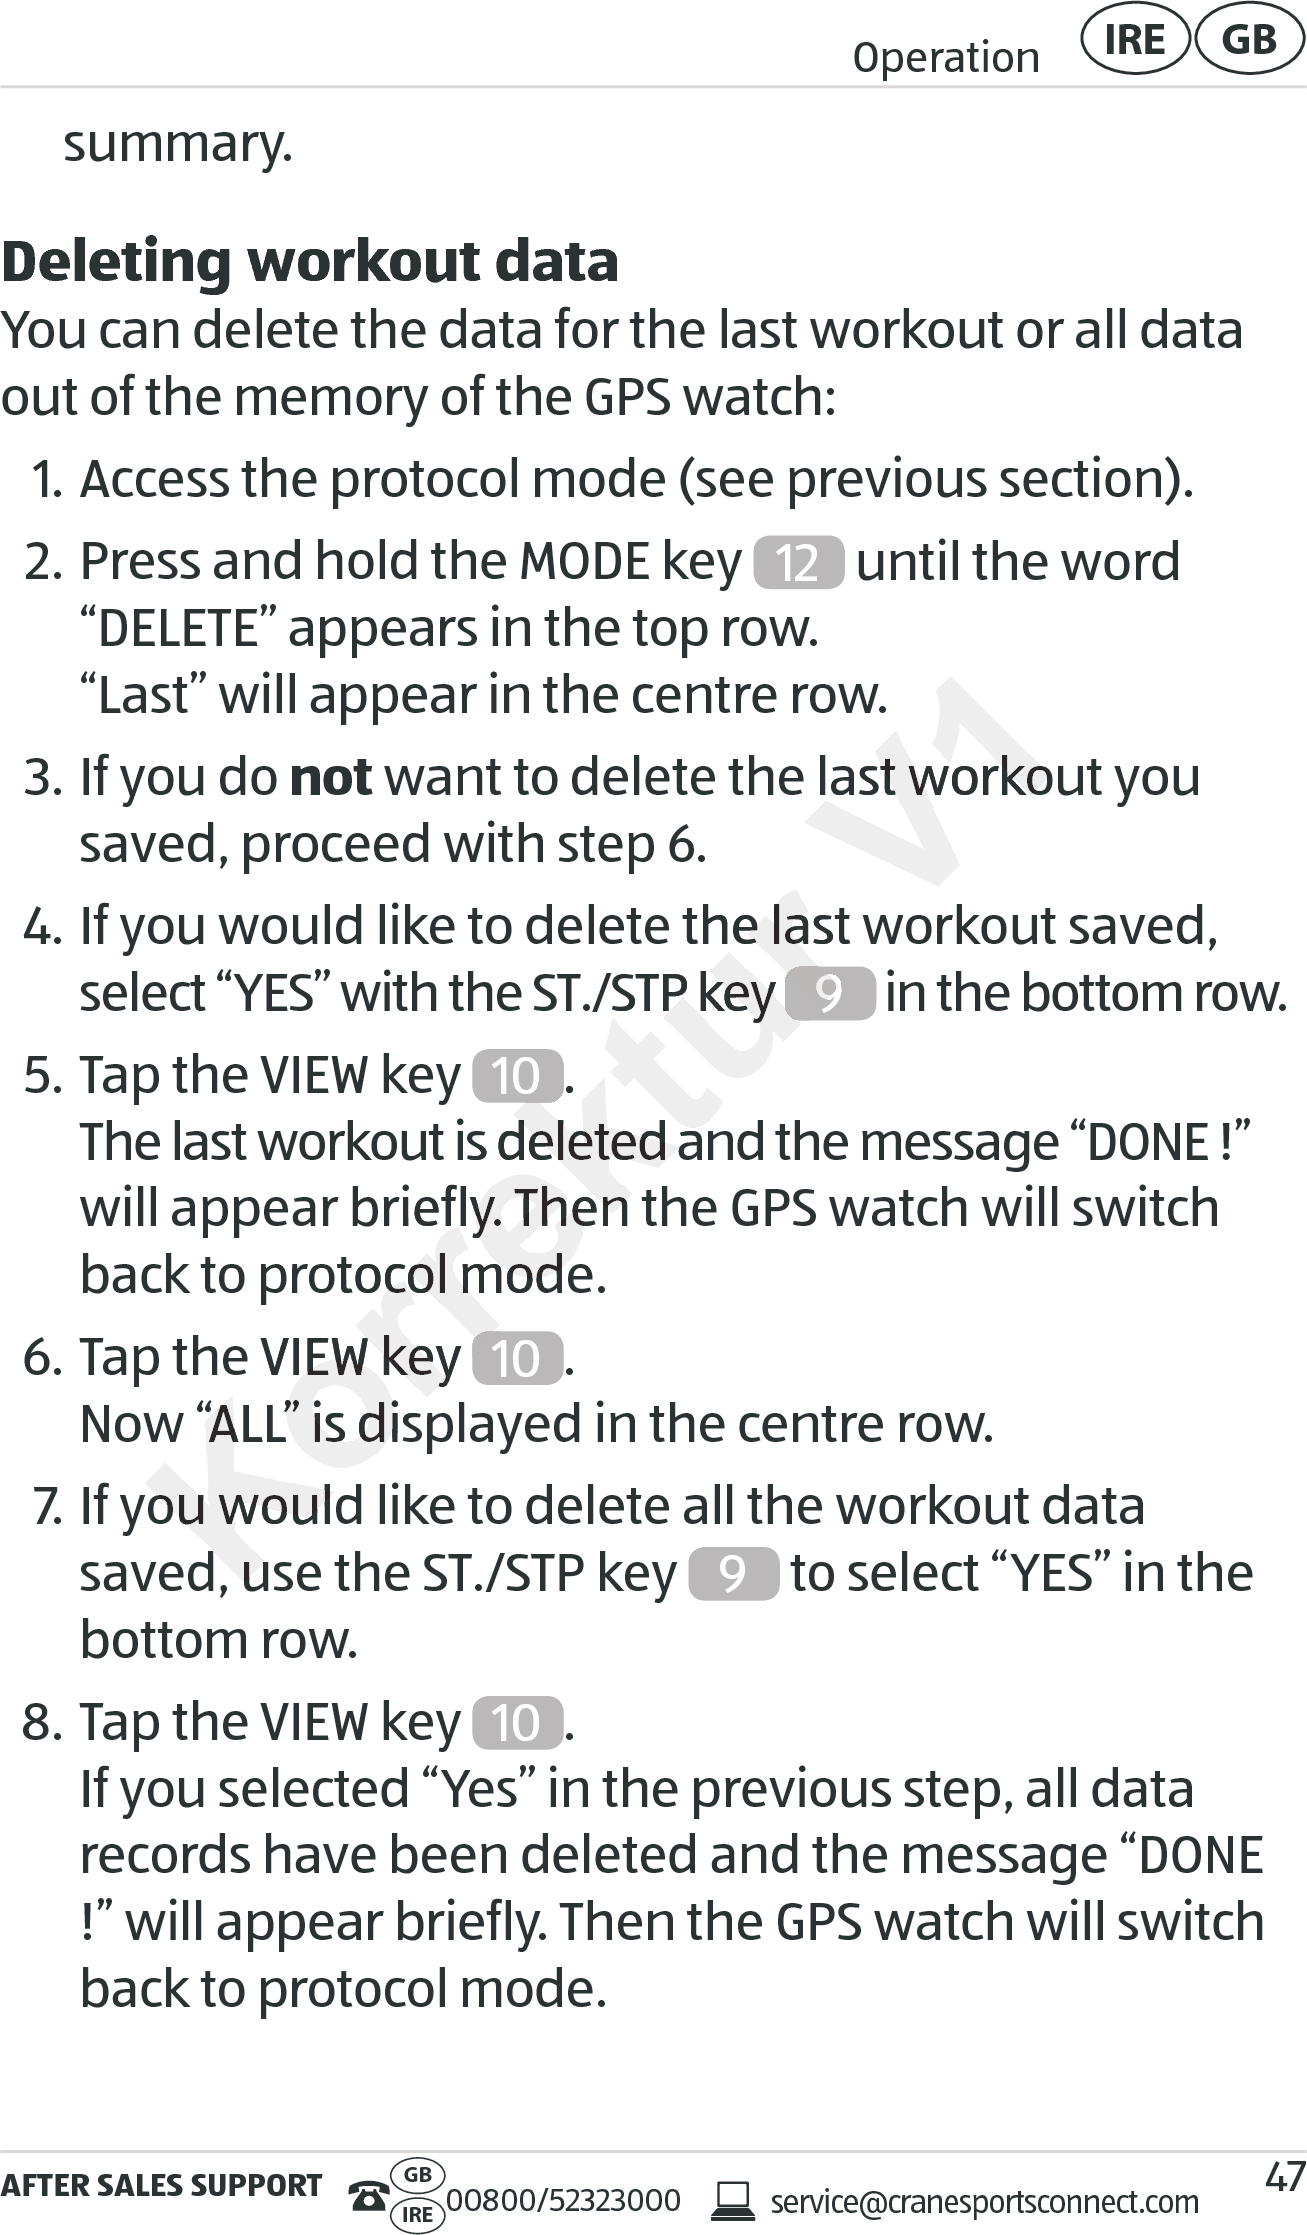 AFTER SALES SUPPORTservice@cranesportsconnect.comGBIRE 00800/52323000Operation GBIRE47summary.Deleting workout dataYou can delete the data for the last workout or all data out of the memory of the GPS watch:1. Access the protocol mode (see previous section).2. Press and hold the MODE key  12  until the word  “DELETE” appears in the top row. “Last” will appear in the centre row.3. If you do not want to delete the last workout you saved, proceed with step 6.4. If you would like to delete the last workout saved,  select “YES” with the ST./STP key  9 in the bottom row.5. Tap the VIEW key  10 . The last workout is deleted and the message “DONE !” will appear briefly. Then the GPS watch will switch back to protocol mode.6. Tap the VIEW key  10 . Now “ALL” is displayed in the centre row.7. If you would like to delete all the workout data saved, use the ST./STP key  9 to select “YES” in the bottom row.8. Tap the VIEW key  10 . If you selected “Yes” in the previous step, all data records have been deleted and the message “DONE !” will appear briefly. Then the GPS watch will switch back to protocol mode.Korrektur o delete the last workout saved, o delete the last workout saved, select “YES” with the ST./STP key select “YES” with the ST./STP key Korrektur 9Korrektur 10. The last workout is deleted and the message “DONE !” The last workout is deleted and the message “DONE !” will appear briefly. Then the GPS watch will switch will appear briefly. Then the GPS watch will switch back to protocol mode.back to protocol mode.Tap the VIEW key VIEW key Korrektur Now “ALL” is displayed in the centre row.Now “ALL” is displayed in the centre row.If you would like tIf you would like tsaved, use the ST./STP key saved, use the ST./STP key V1 want to delete the last workout you  want to delete the last workout you o delete the last workout saved, 